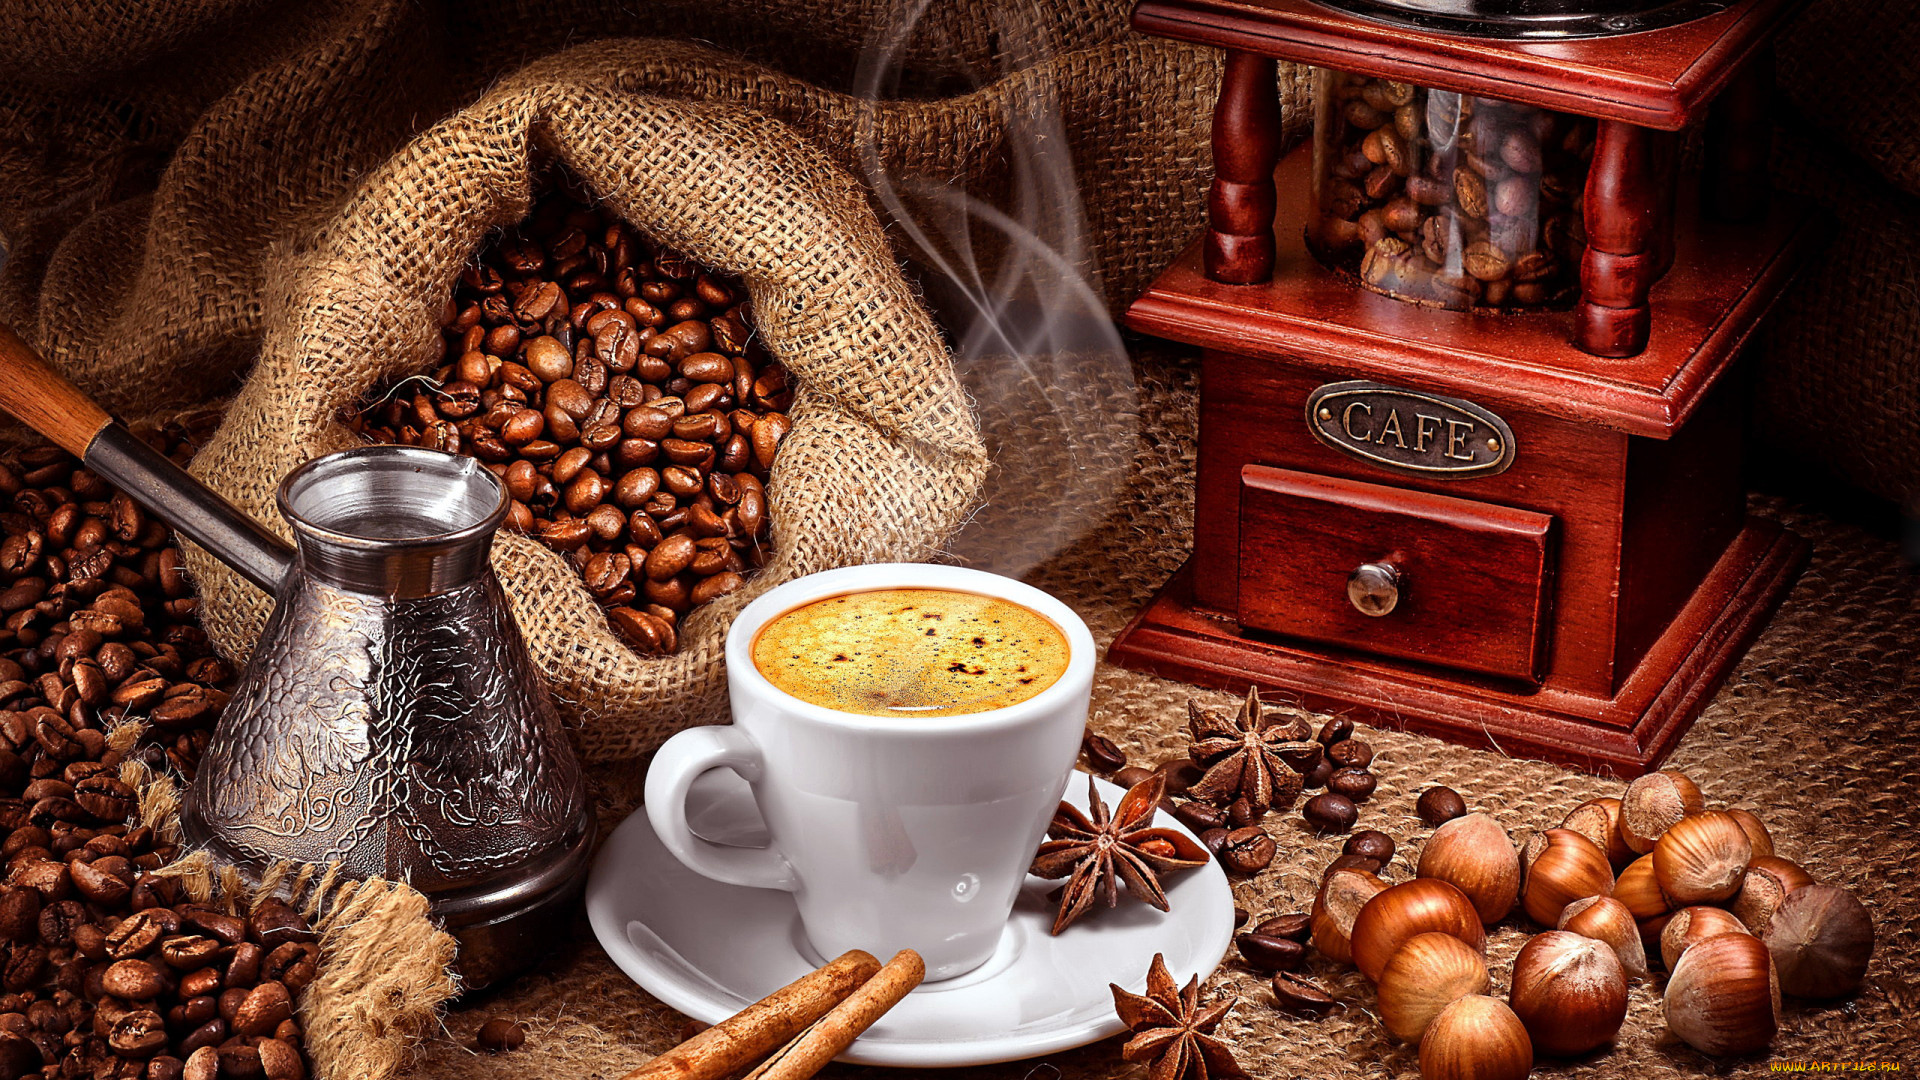 General 1920x1080 food coffee cup coffee beans